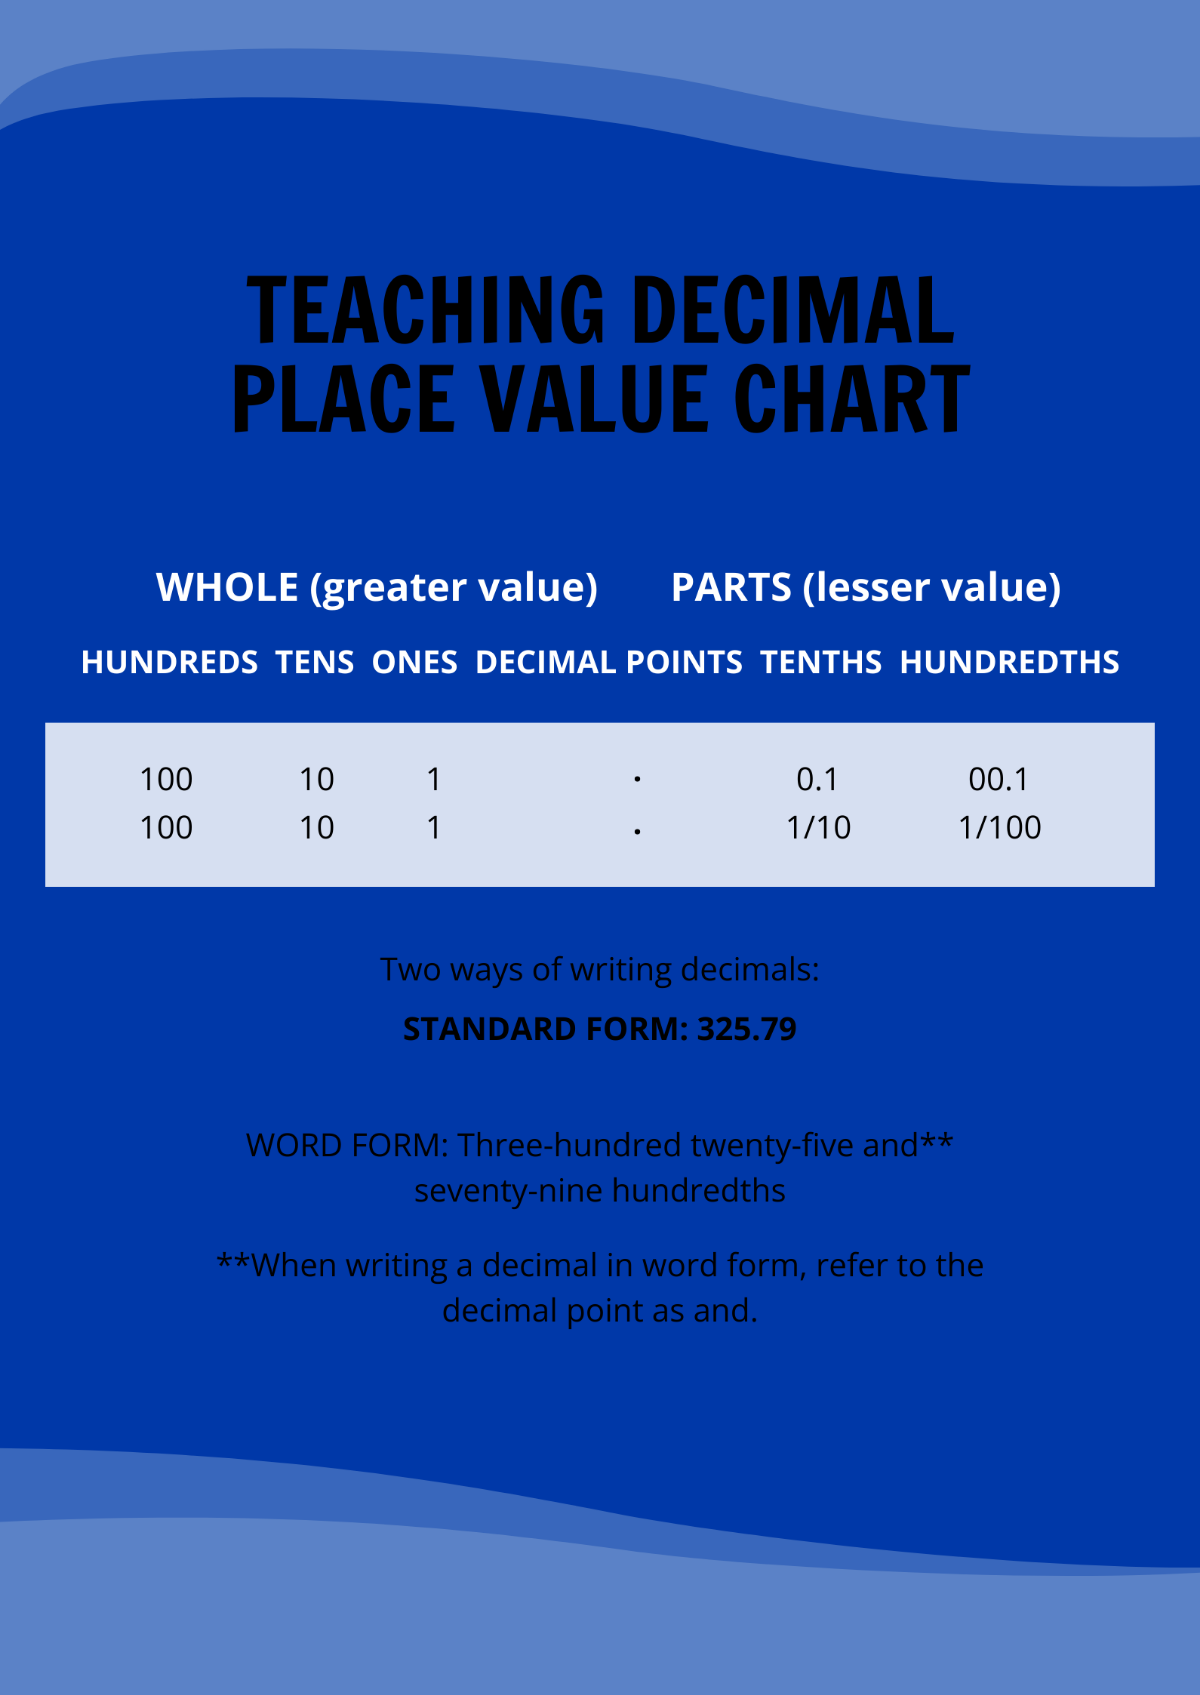 Teaching Decimal Place Value Chart Template